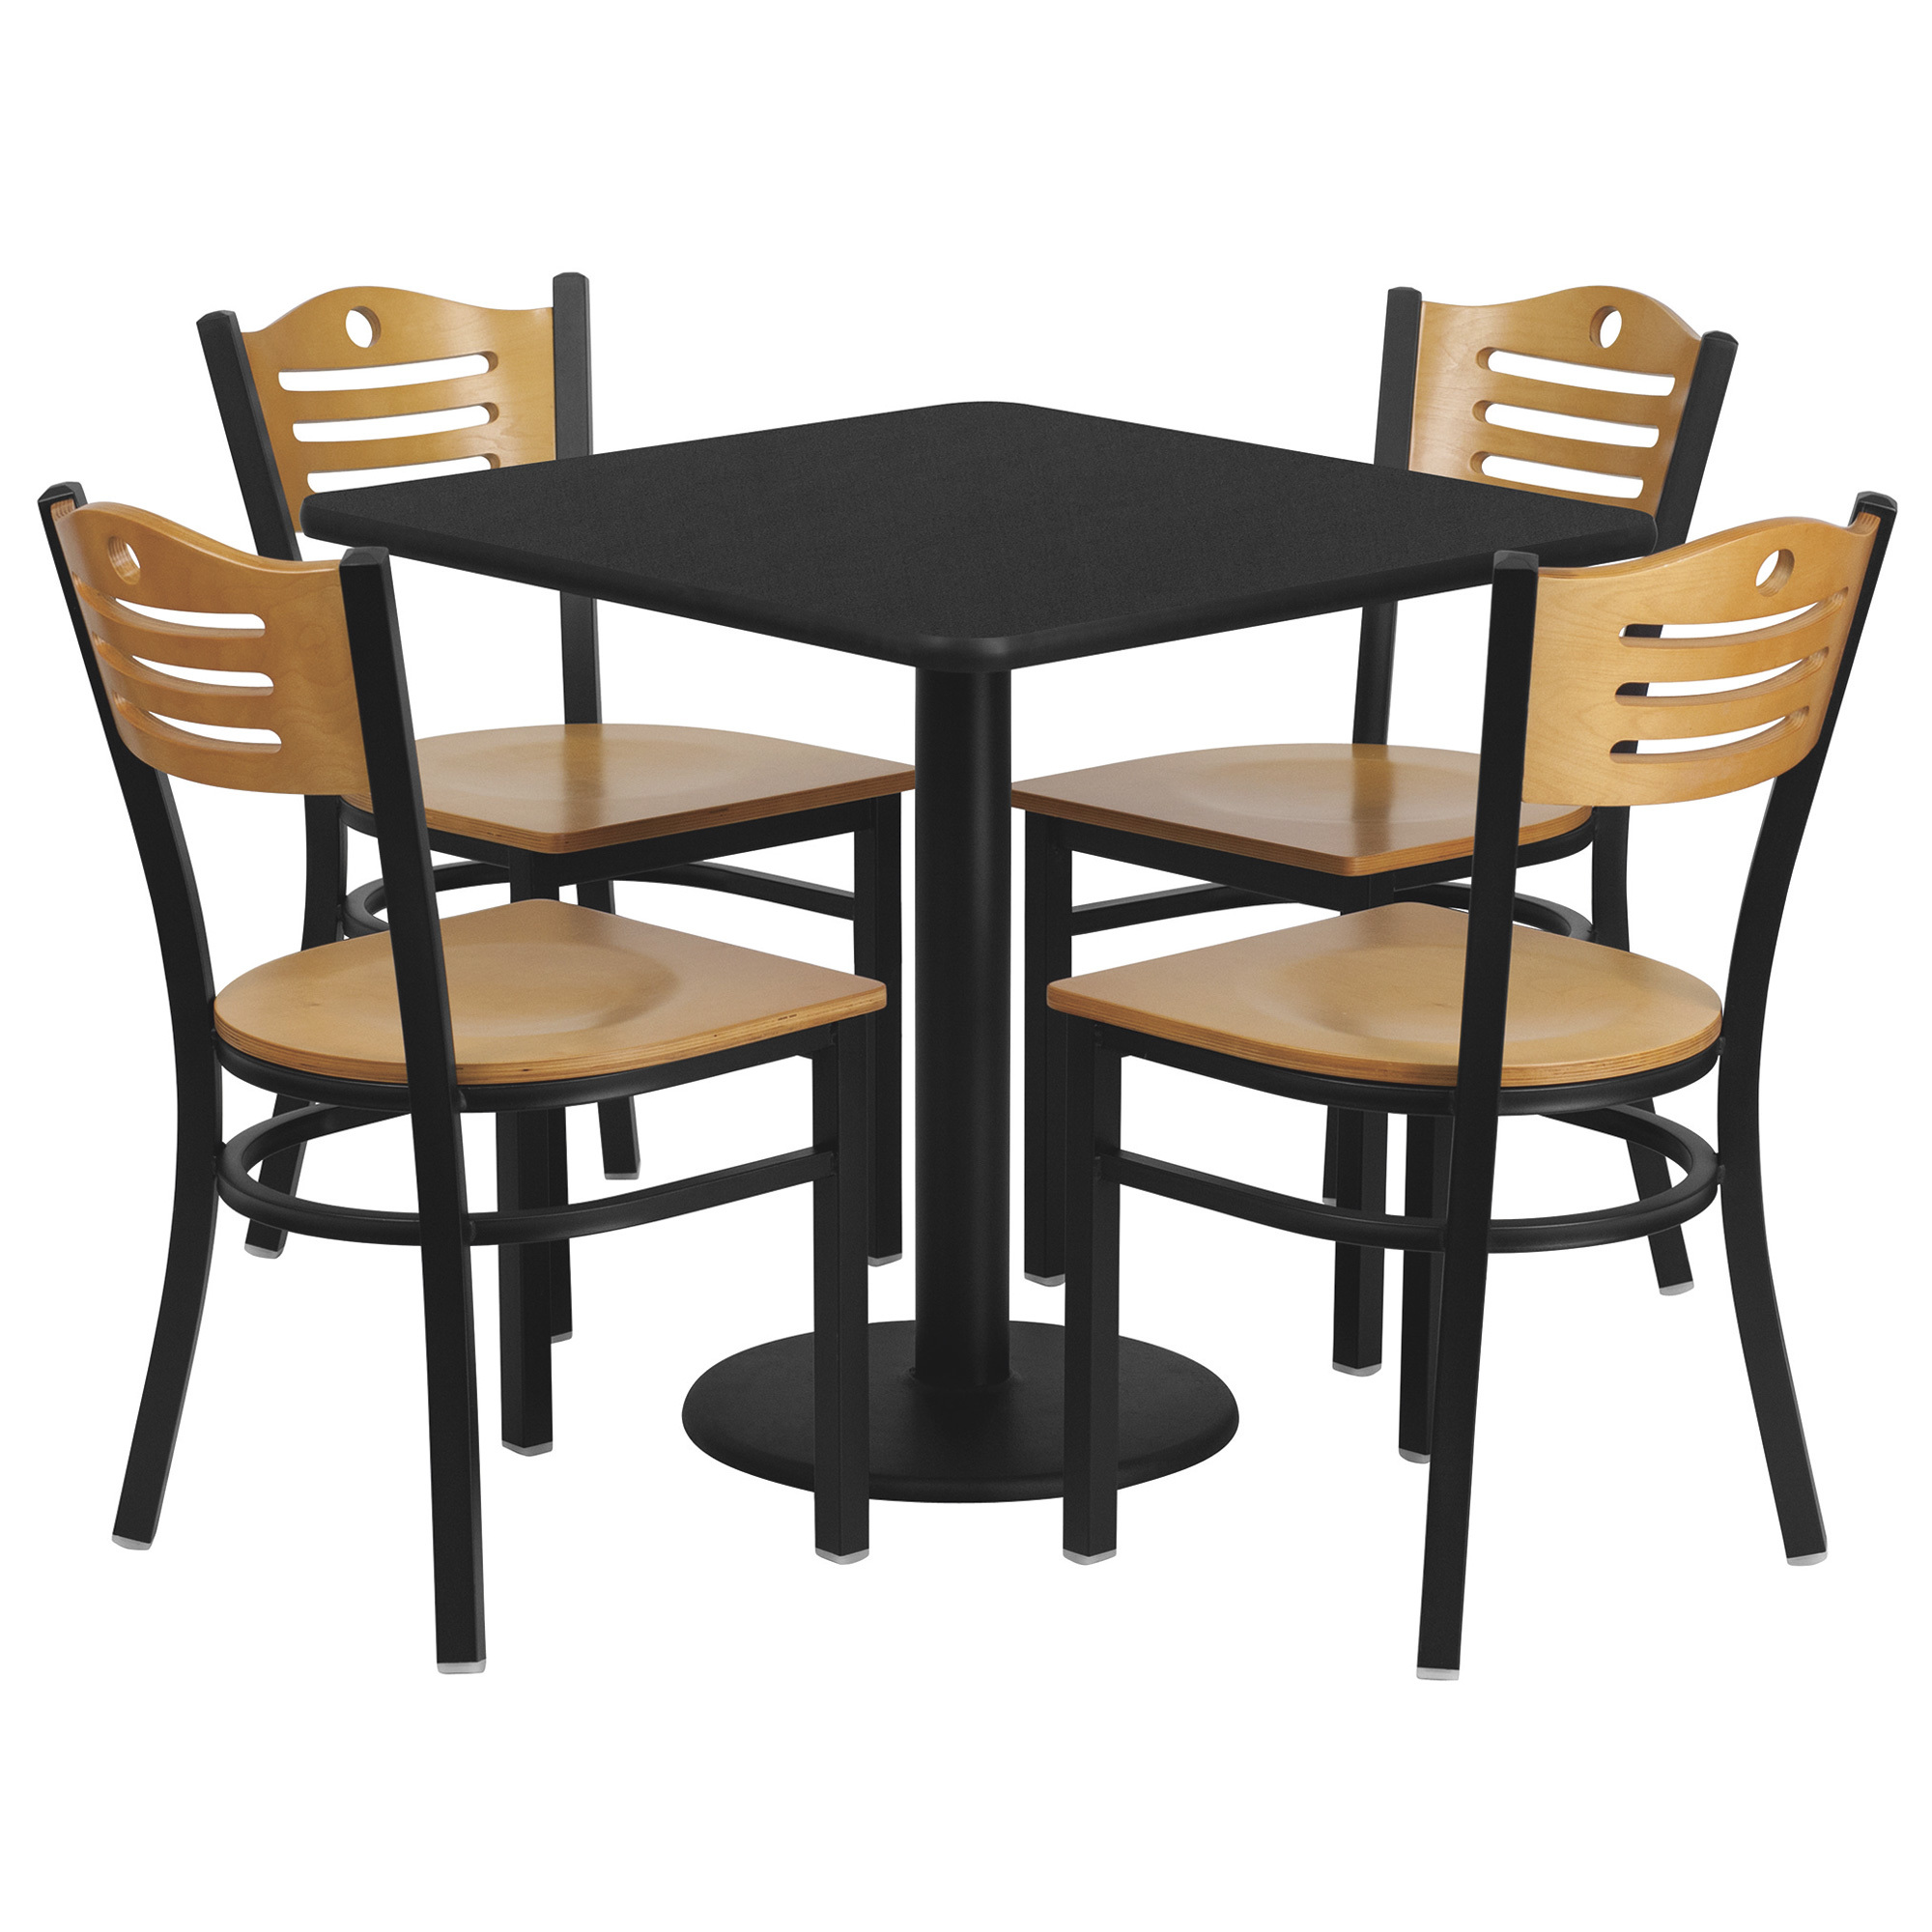 30Inch Square Table and 4-Piece Chair Set — Black Tabletop/Natural Wood Seat, Model - Flash Furniture MD0010